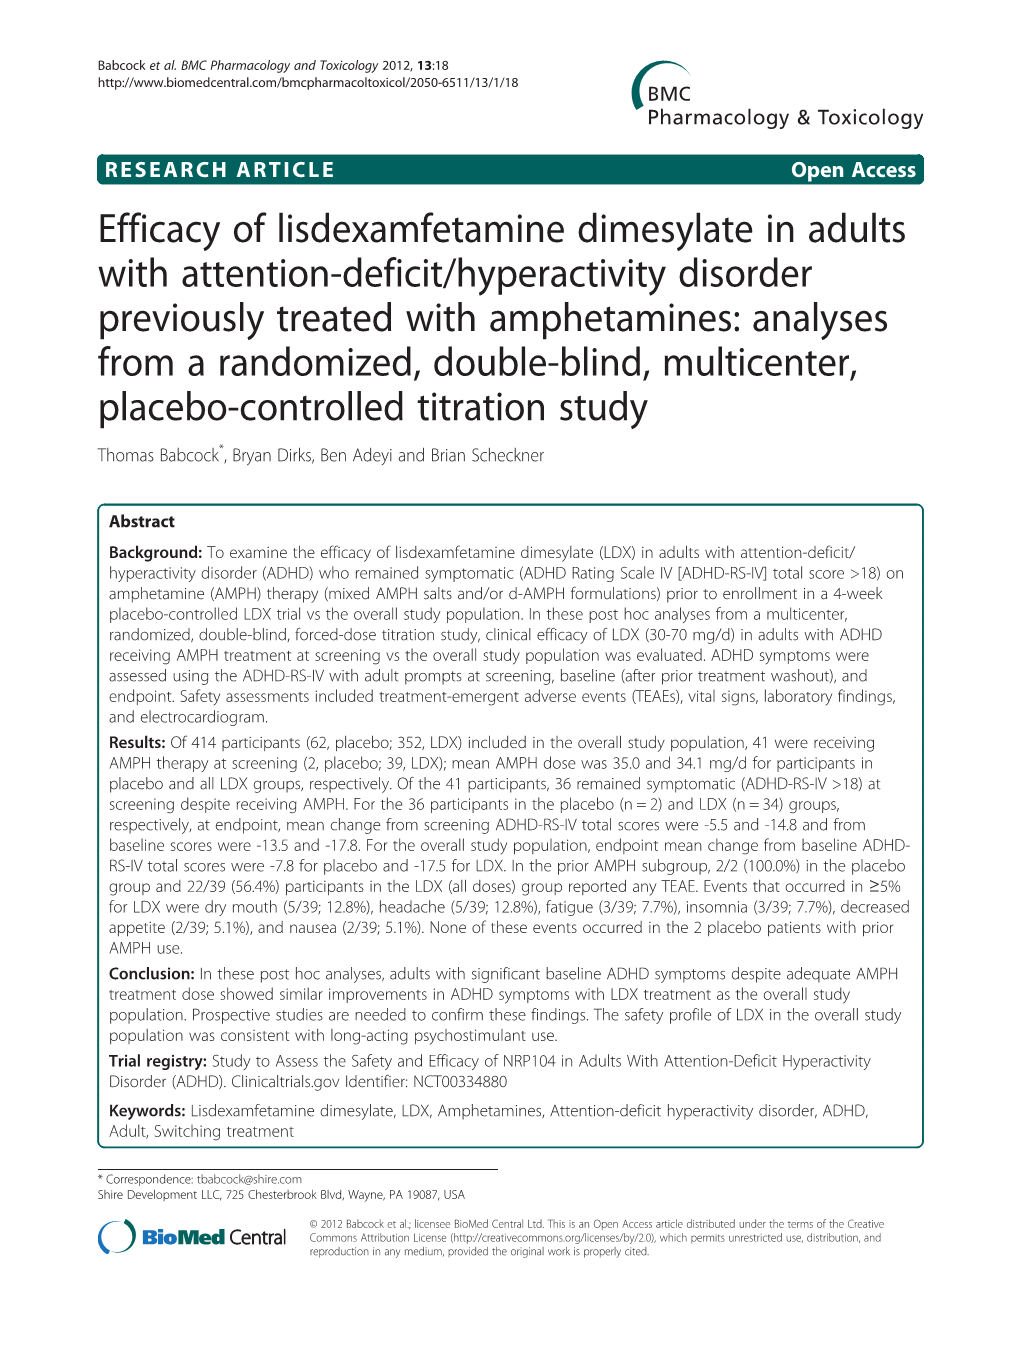 Efficacy of Lisdexamfetamine Dimesylate in Adults with Attention